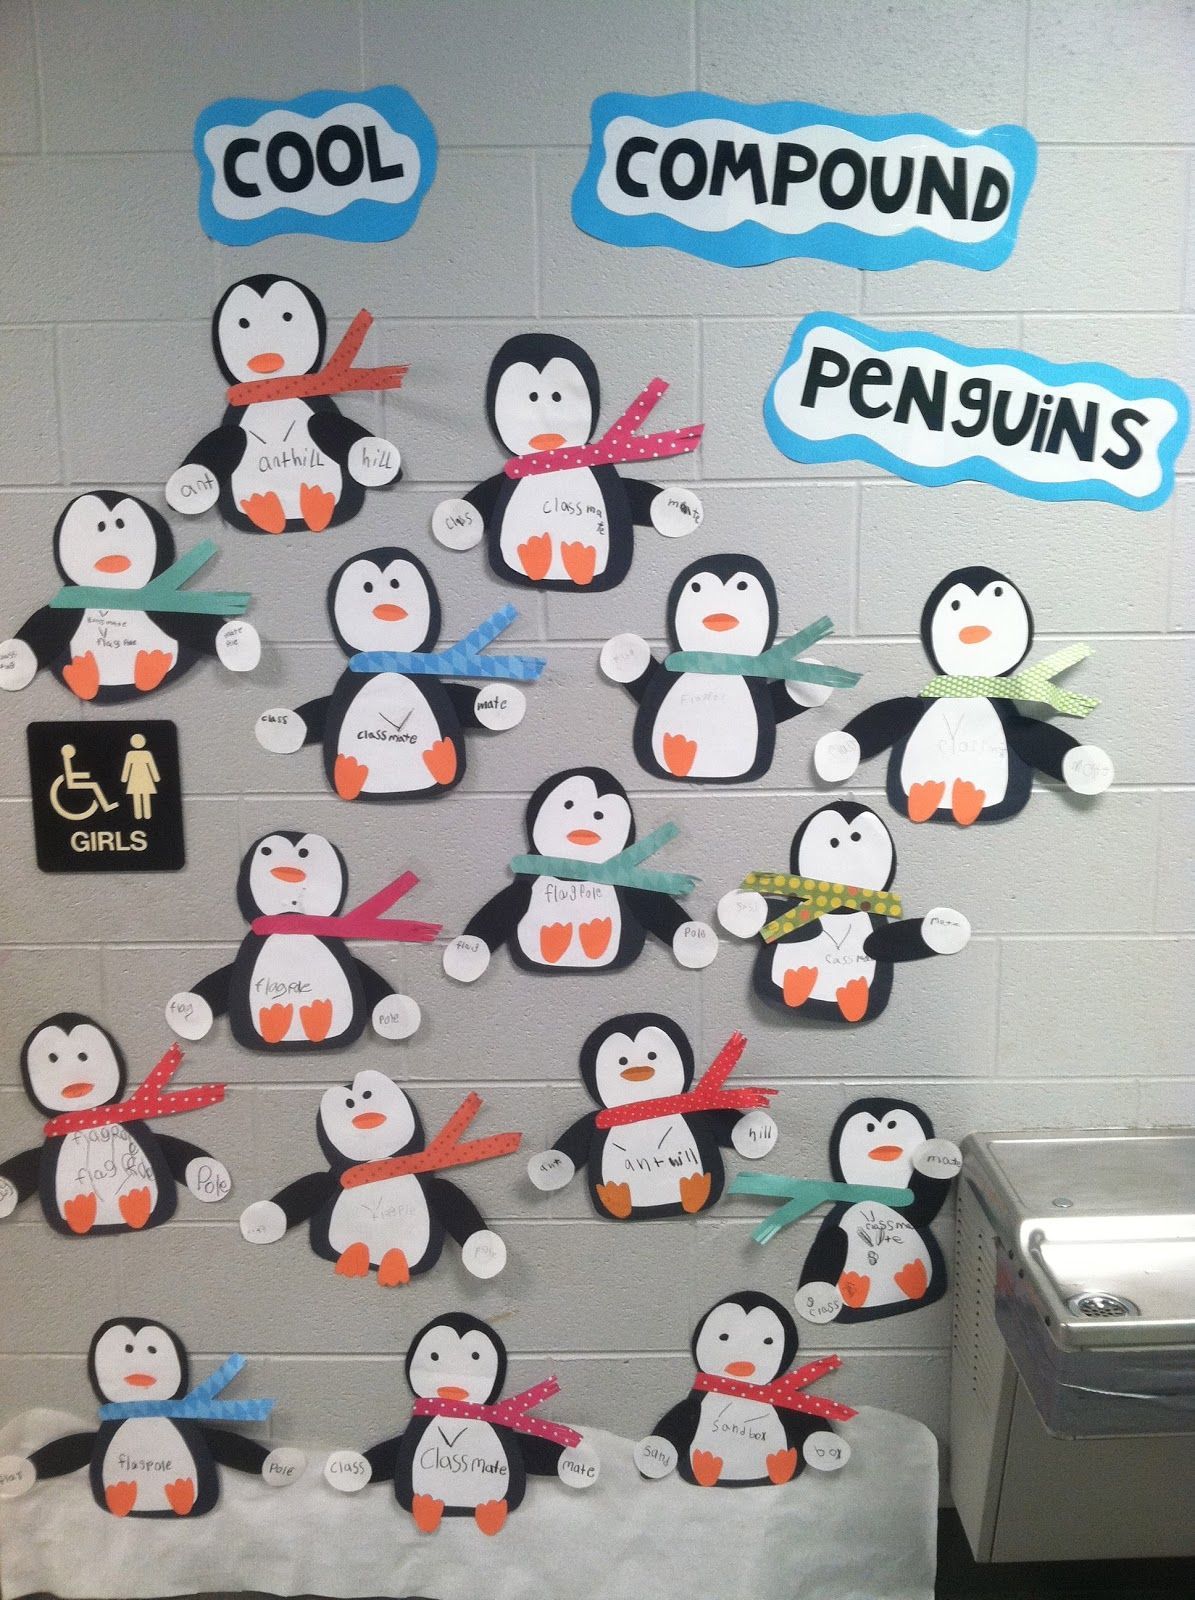 Life in First Grade Blog: “Cool Compound Penguins” (use in the winter while teaching compound words)